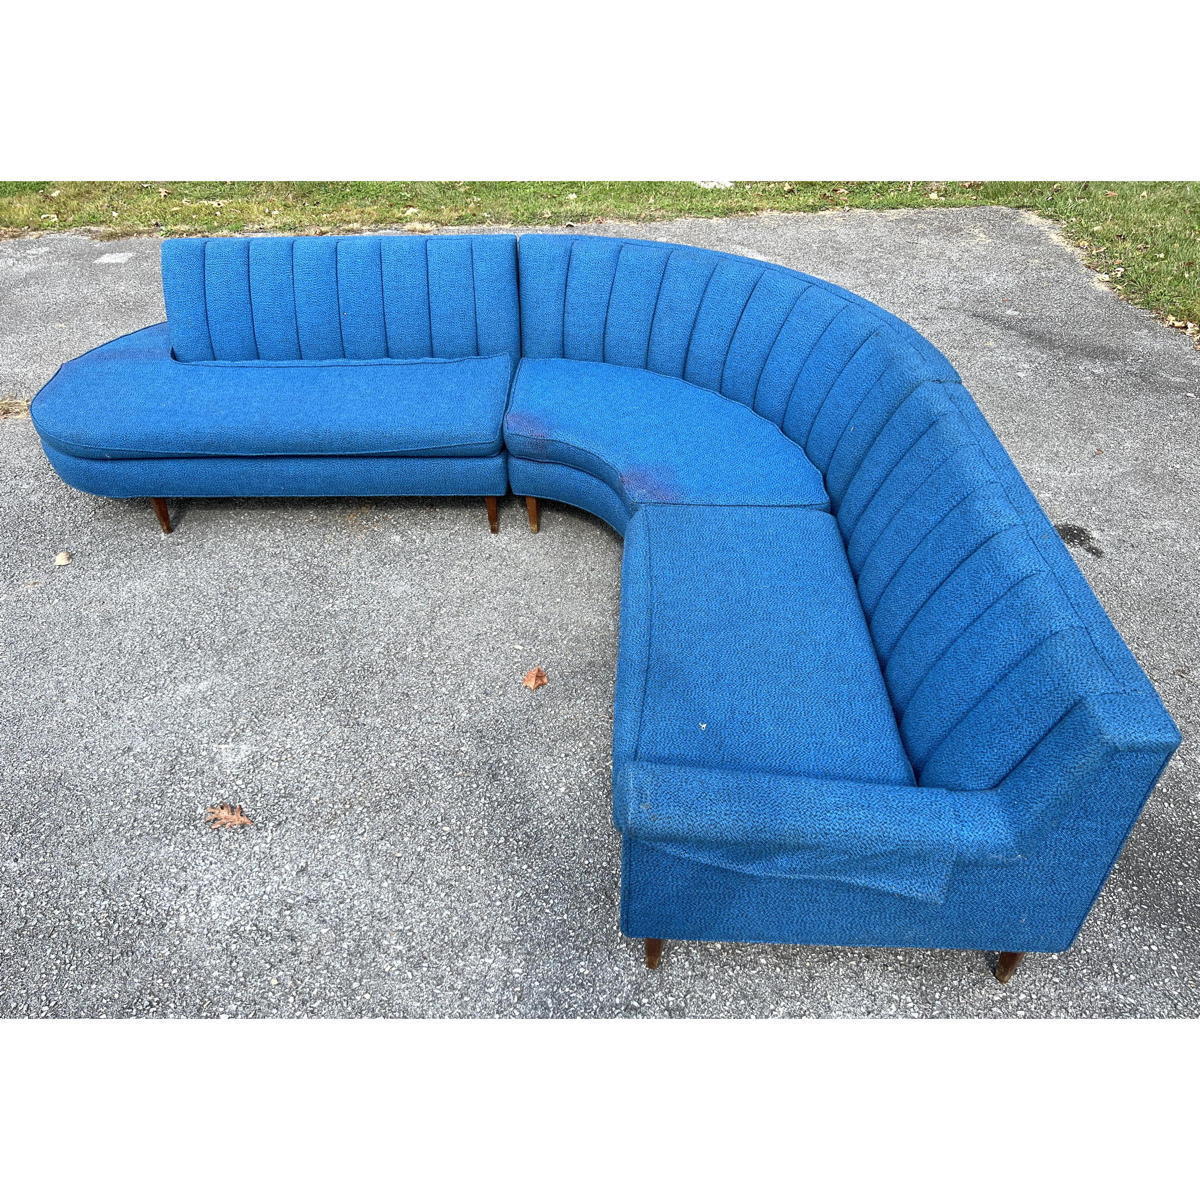 Three Part Sectional Sofa Seating  2a7851